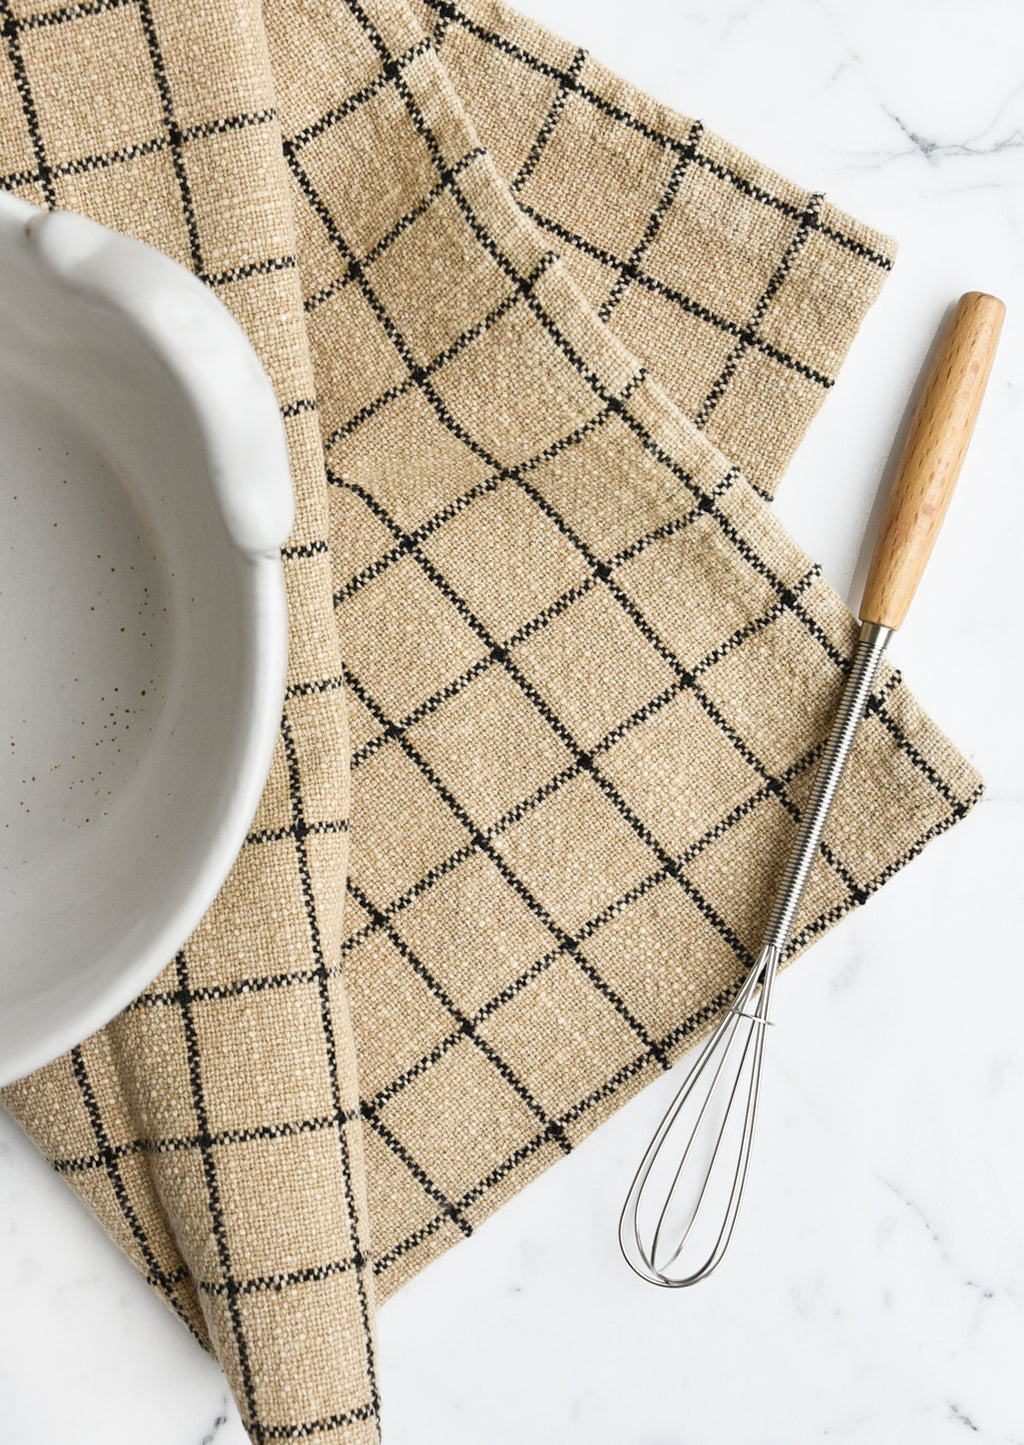 Sepia Check: A sepia toned tea towel with black grid pattern folded under a bowl with a whisk